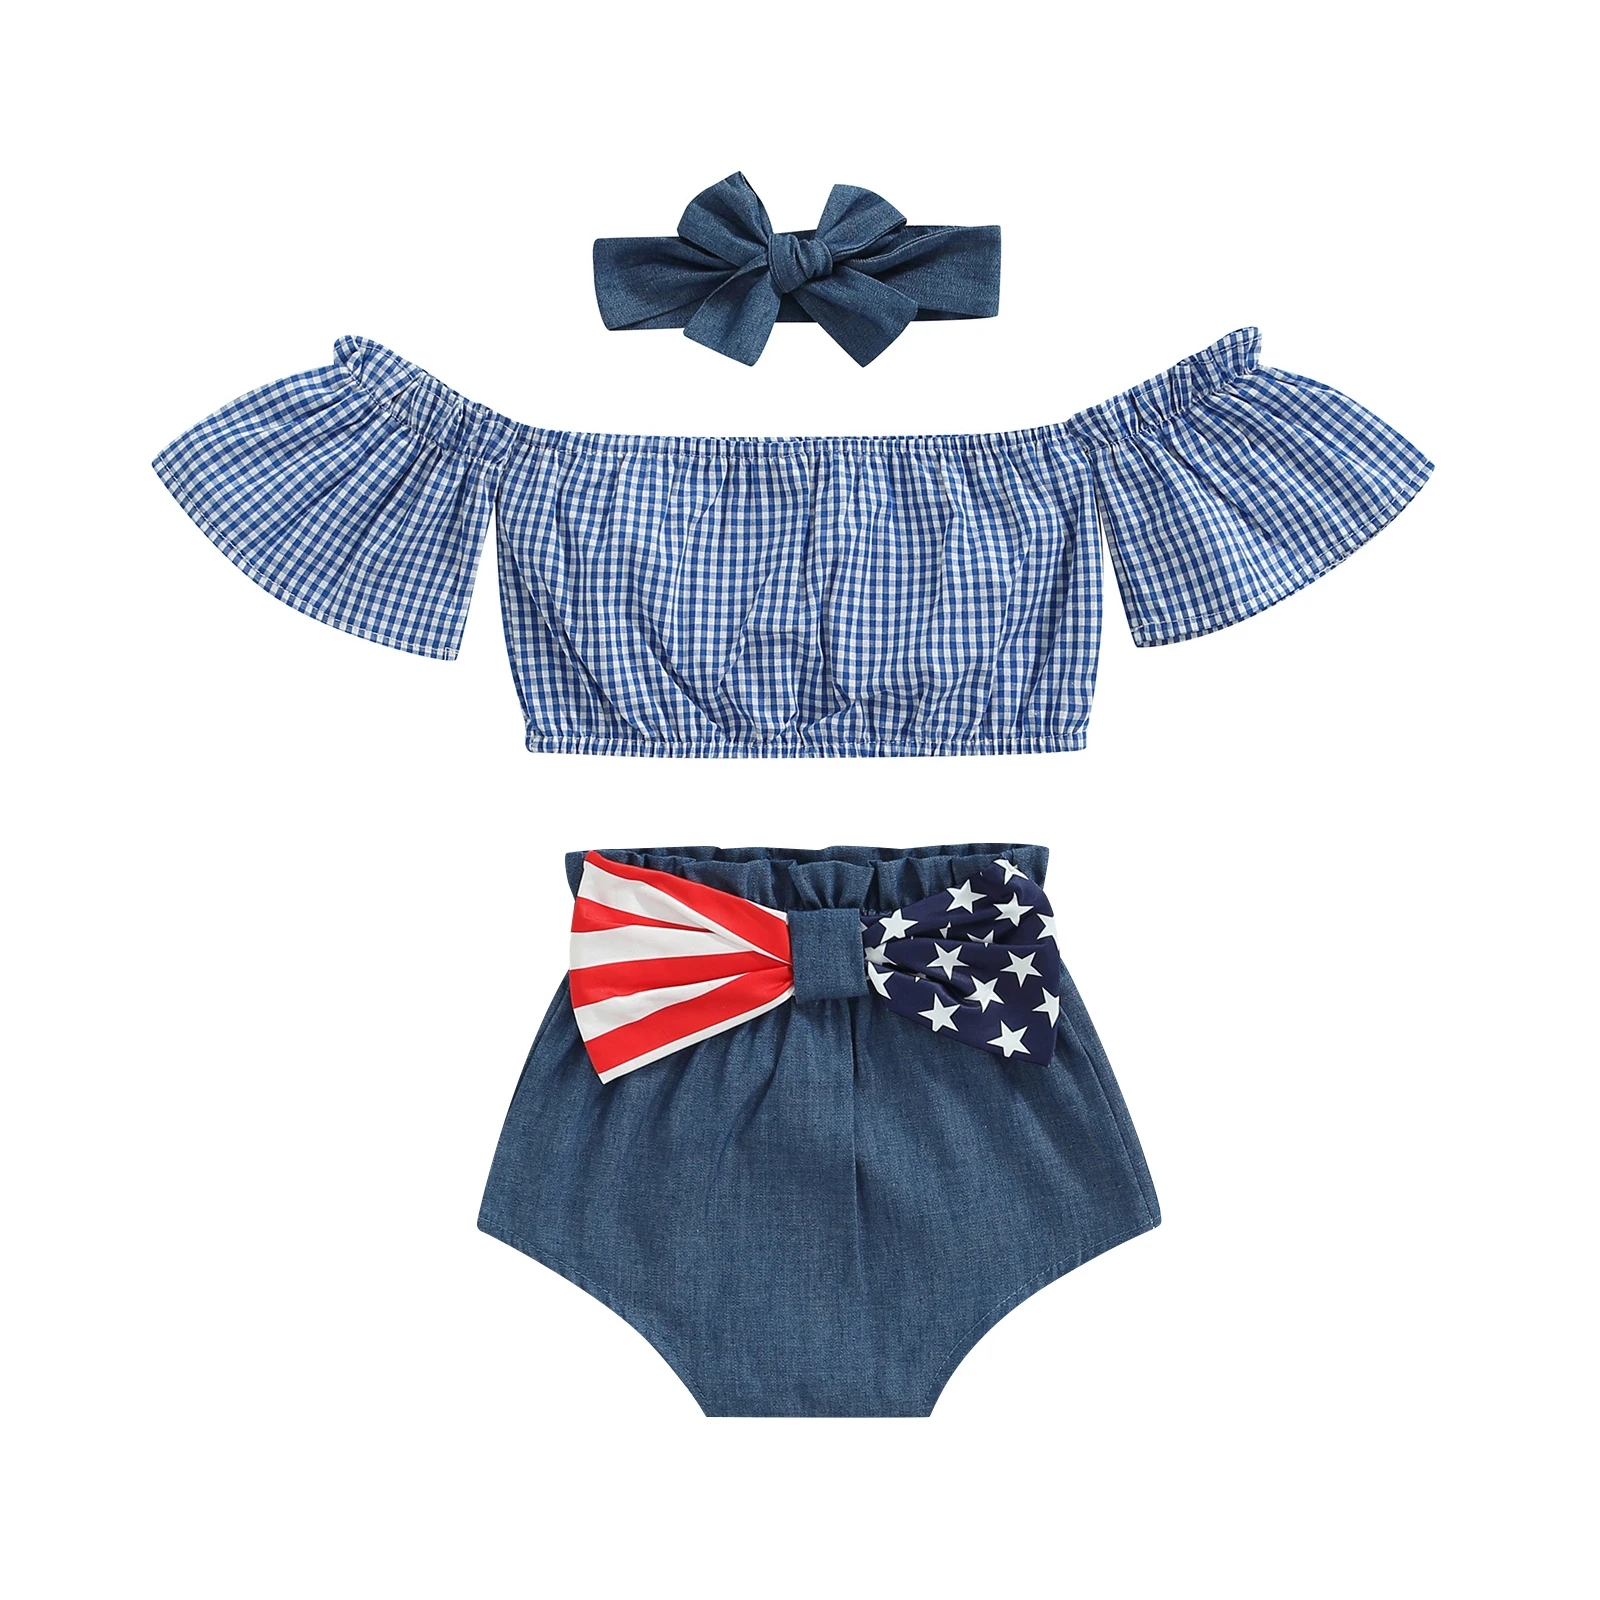 

3-Piece 4th of July Baby Girls Outfit, Plaid Off-Shoulder Crop Tops + Snaps Pantie + Hairband for Toddlers, 0-24 Months